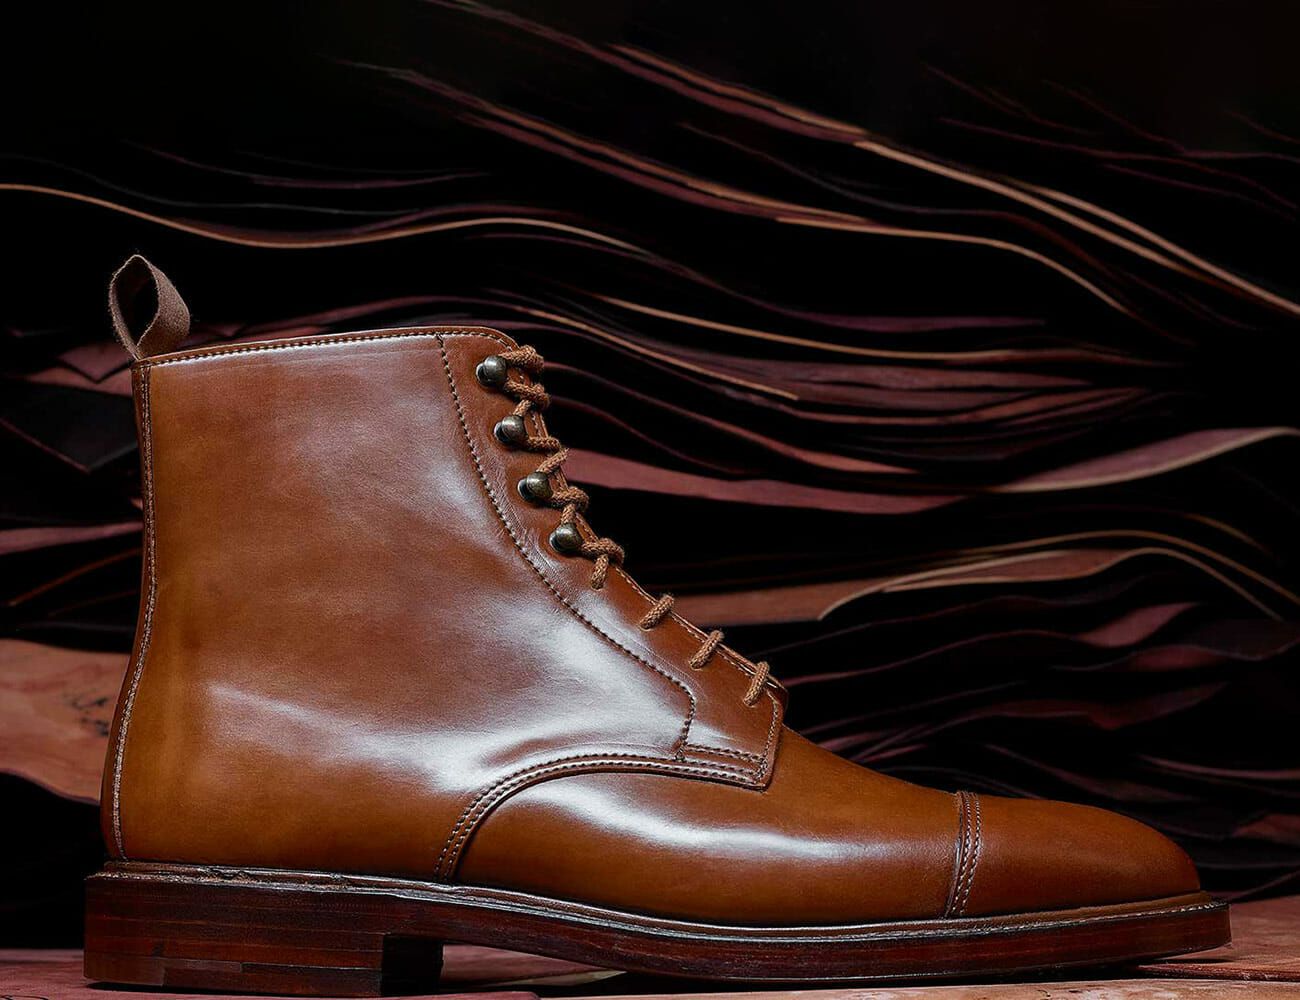 Shell Cordovan Leather Shoes Are 